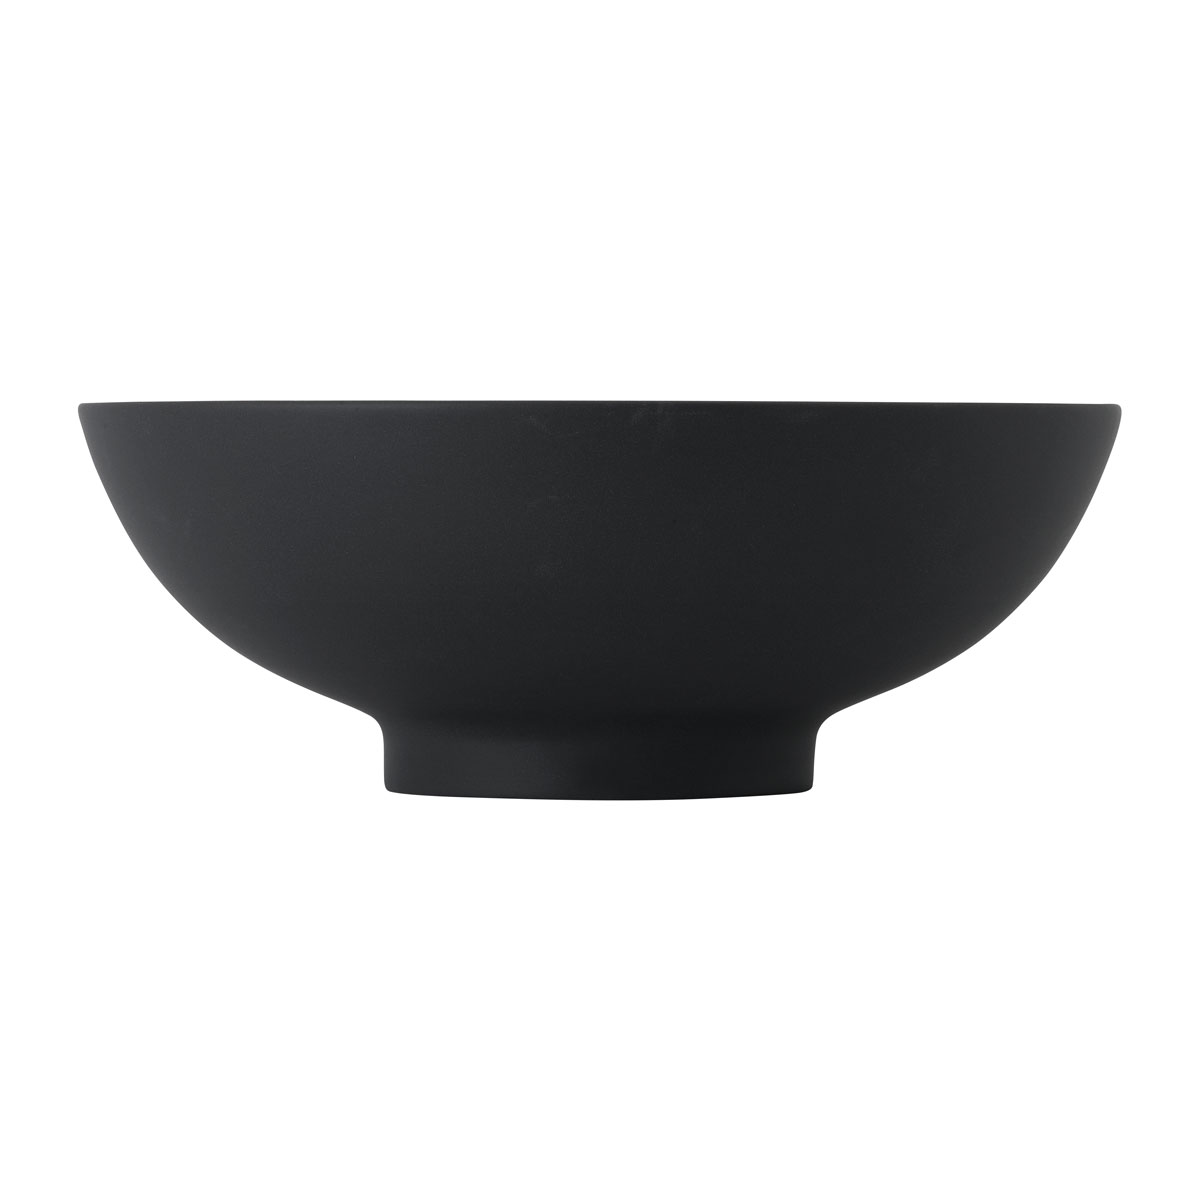 Royal Doulton Barber and Osgerby Olio Black Serving Bowl